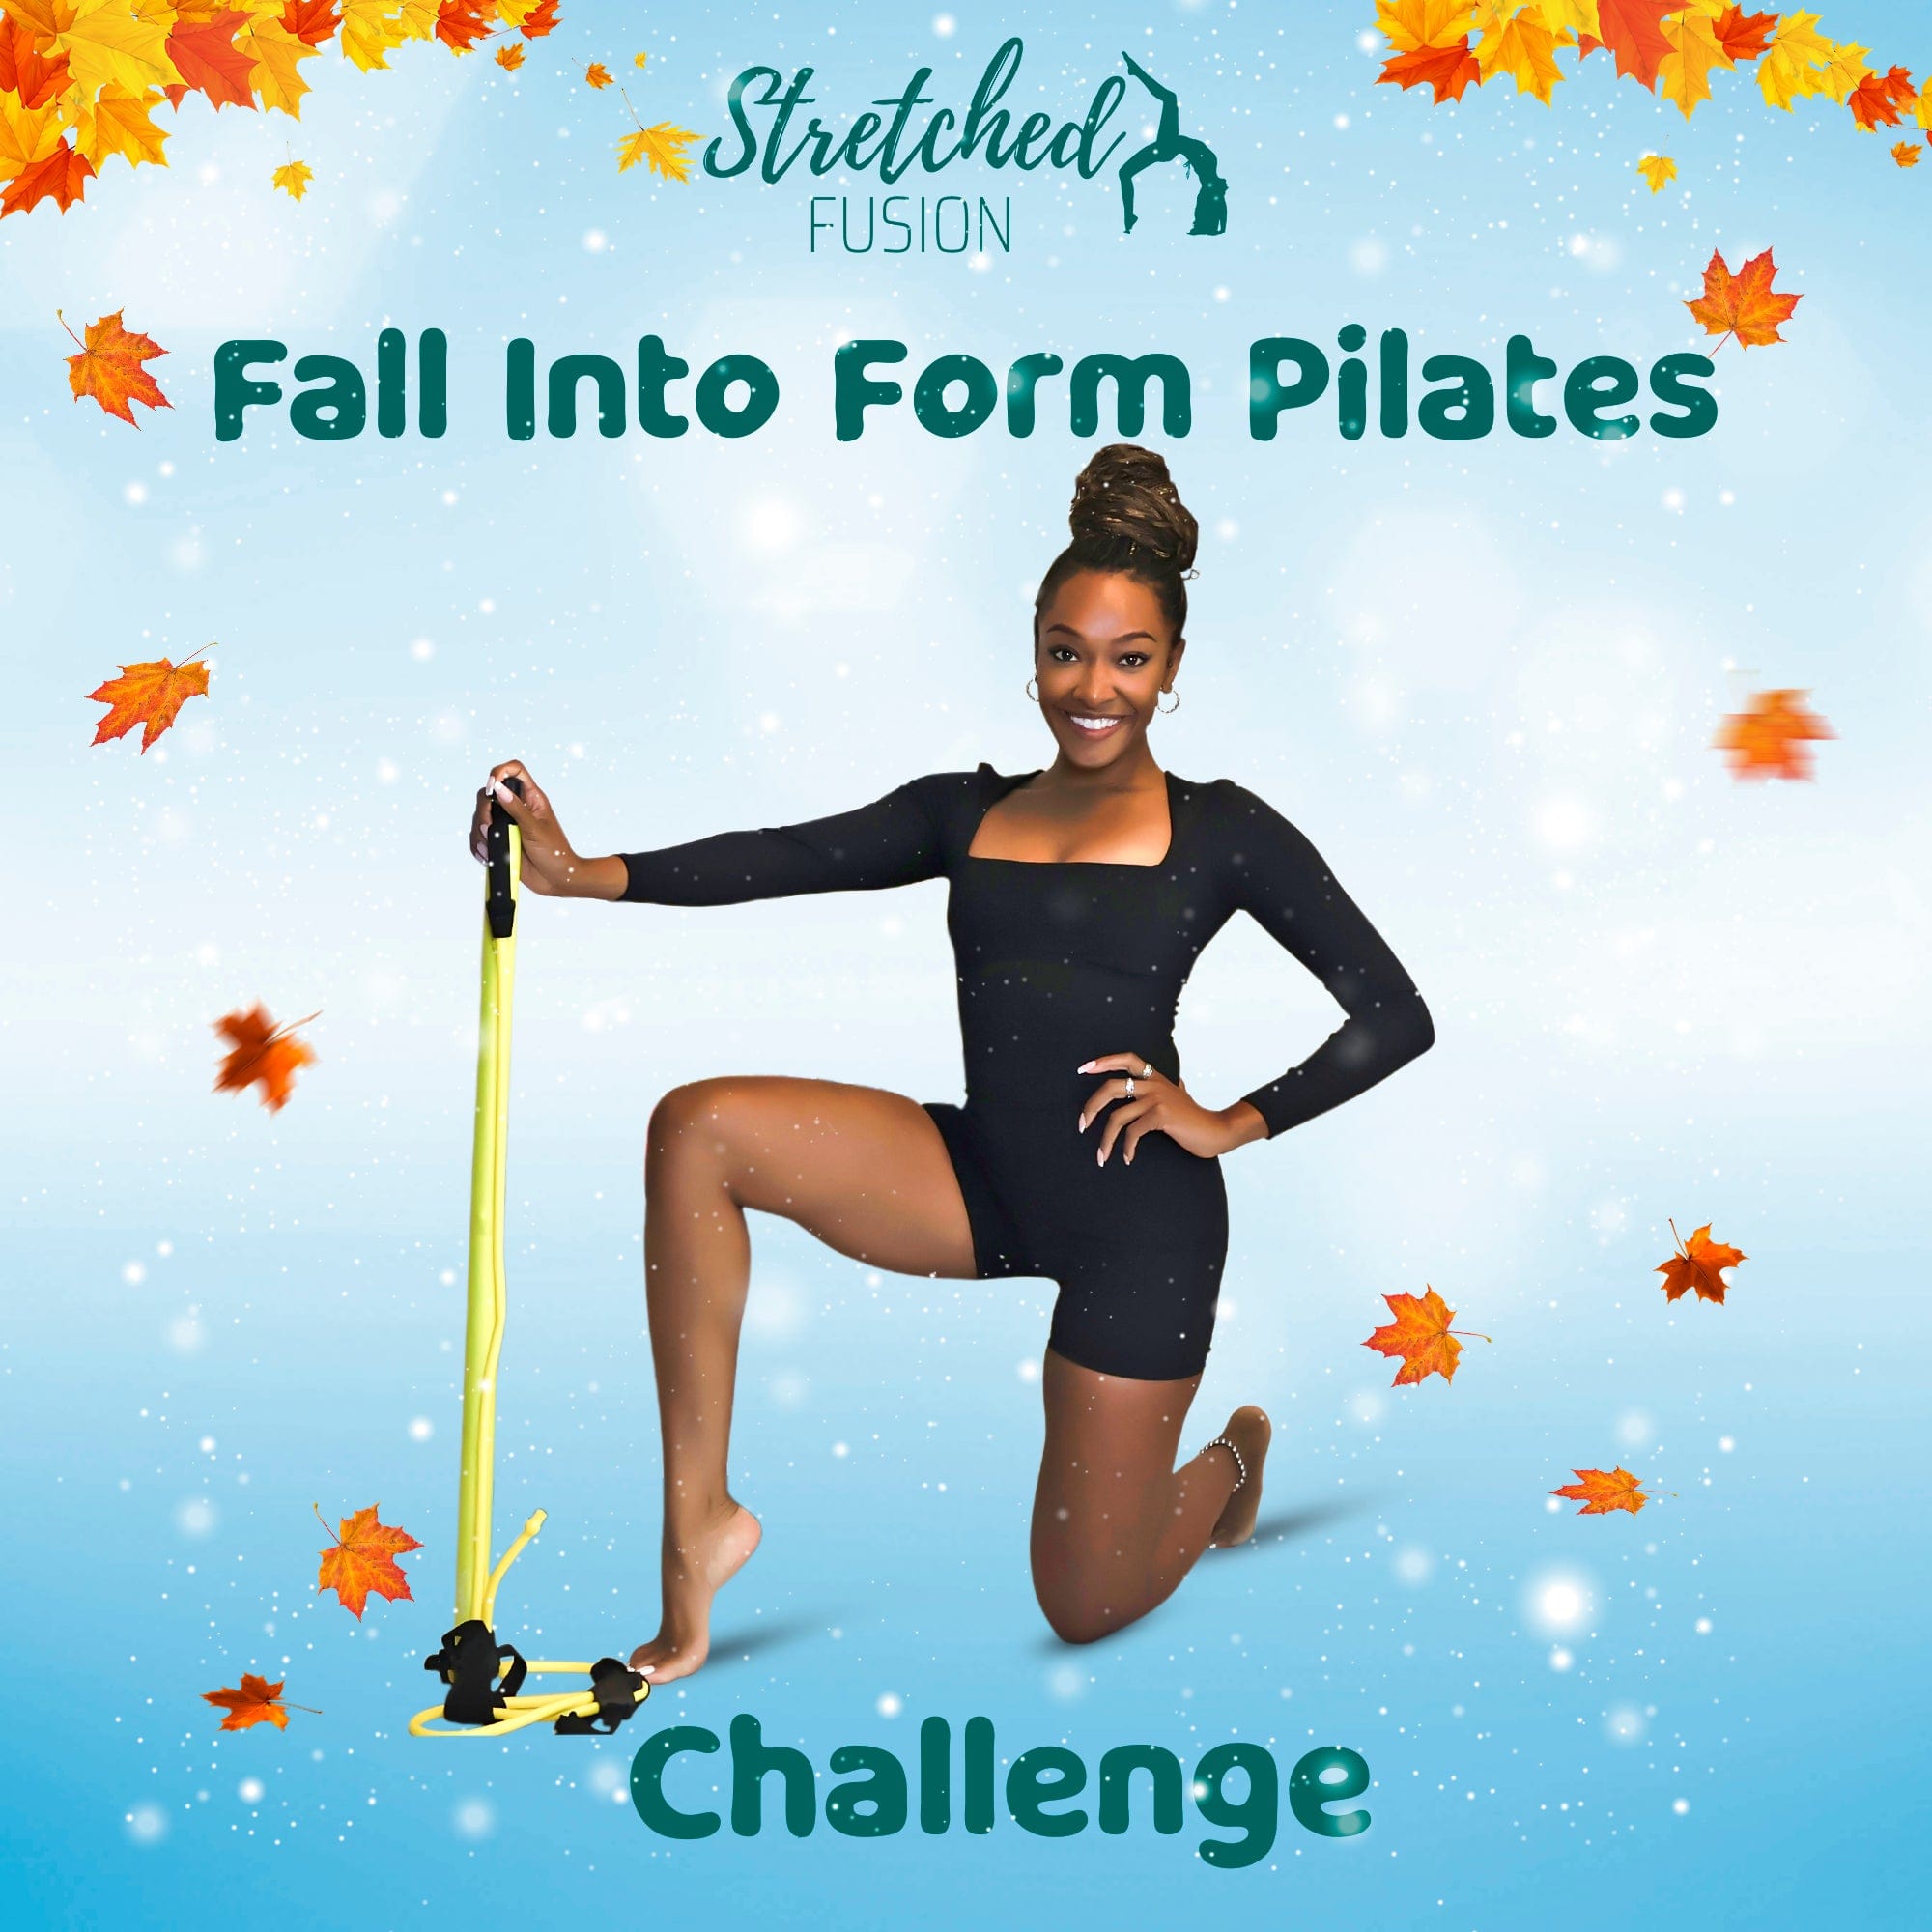 Fall Into Form Challenge - Pilates Bar Workout Videos - Stretched Fusion